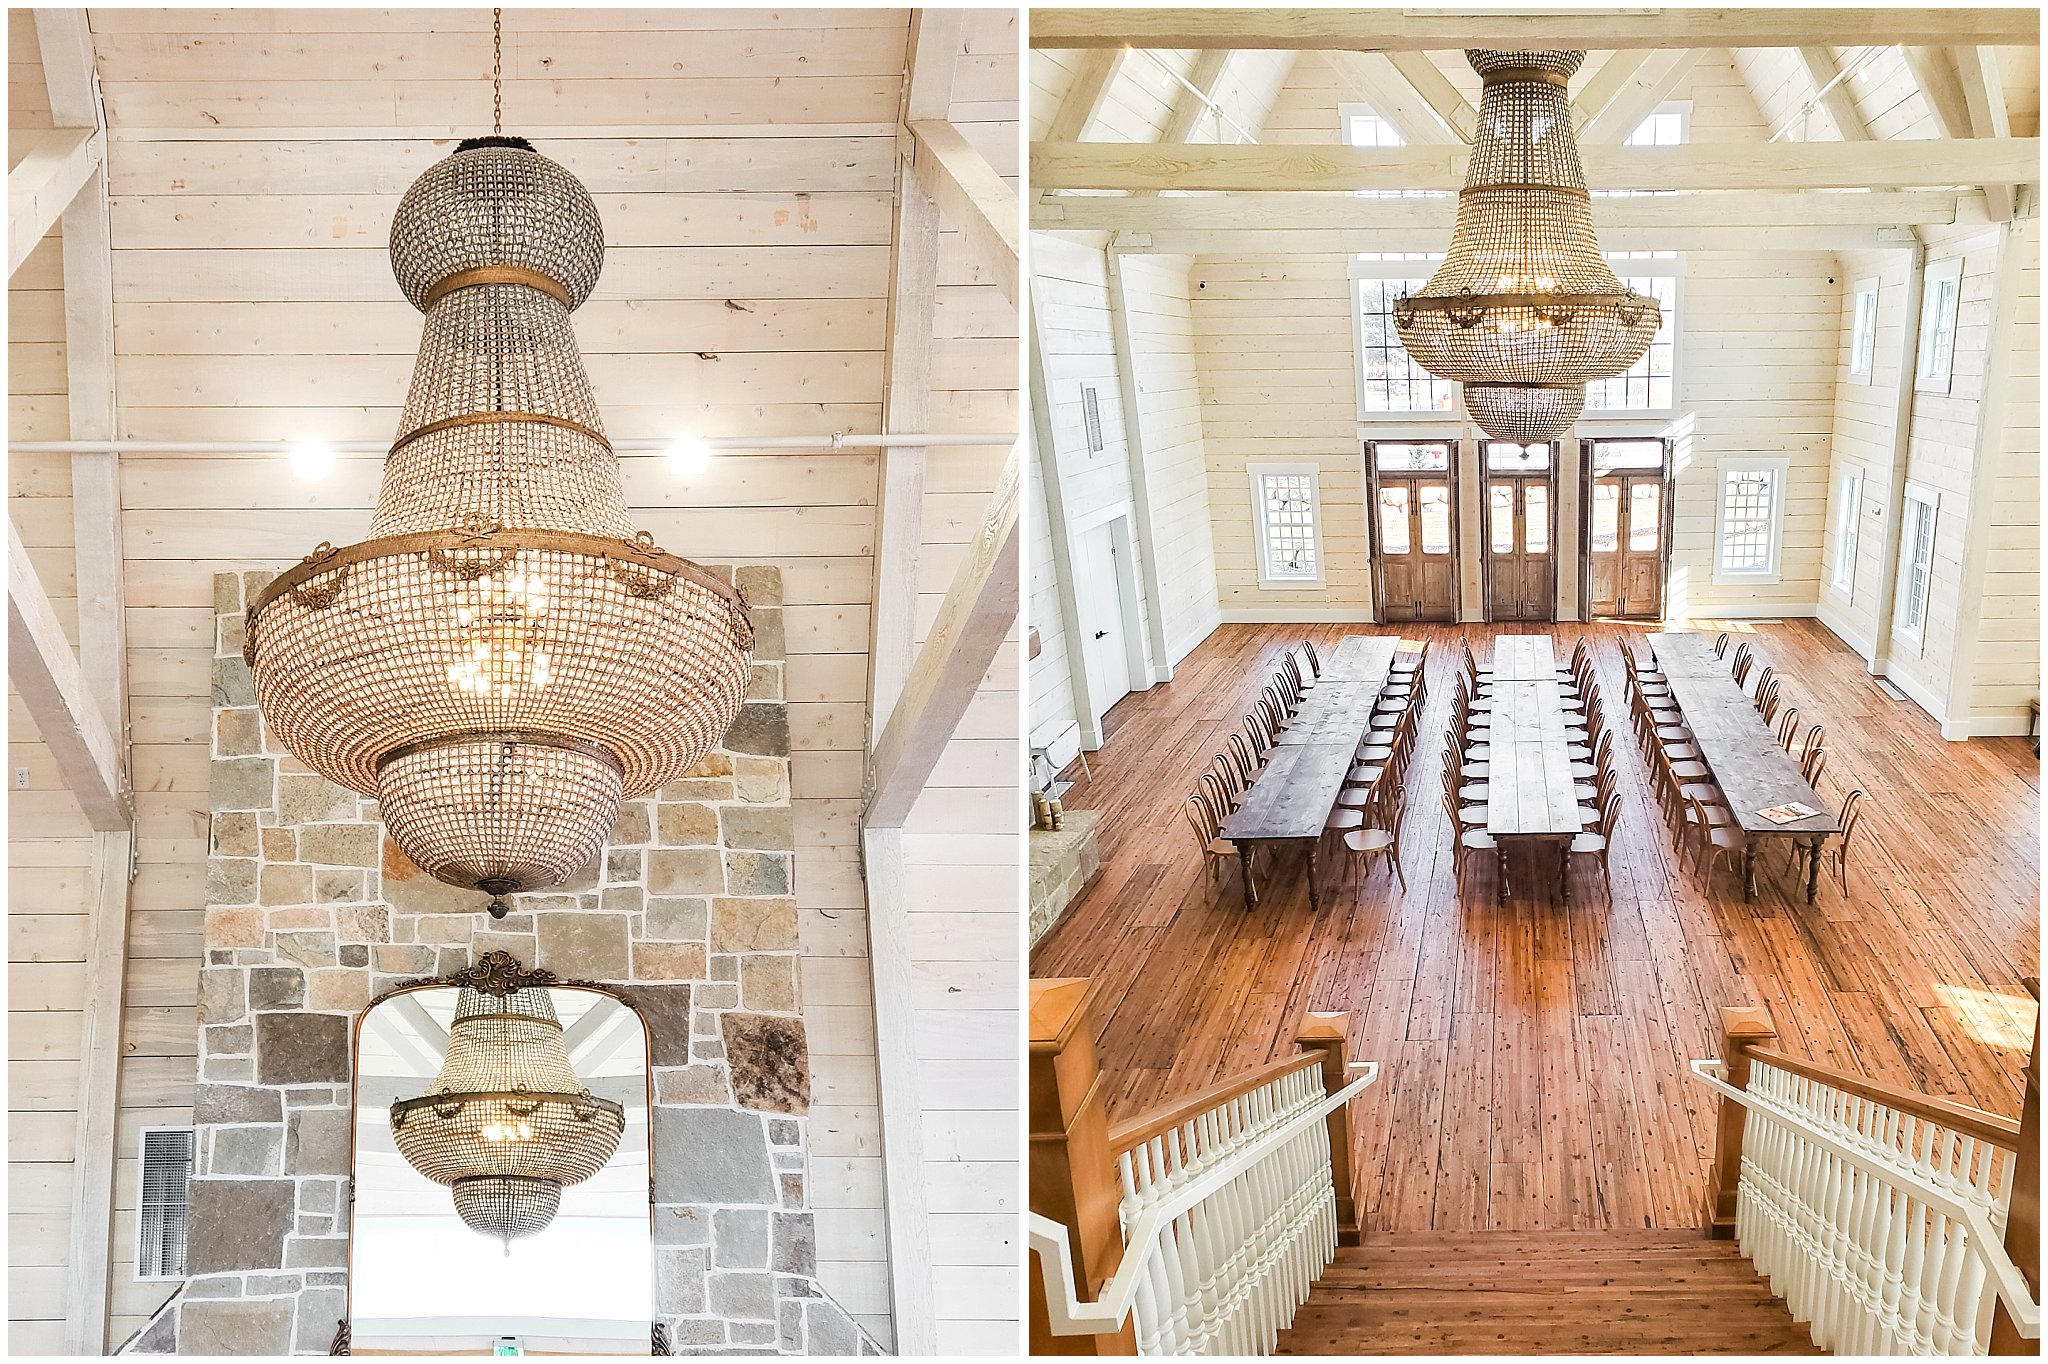 Chandelier and main floor | Behind the Scenes of Walker Farms | Utah Wedding Venue | Jessie and Dallin Photography